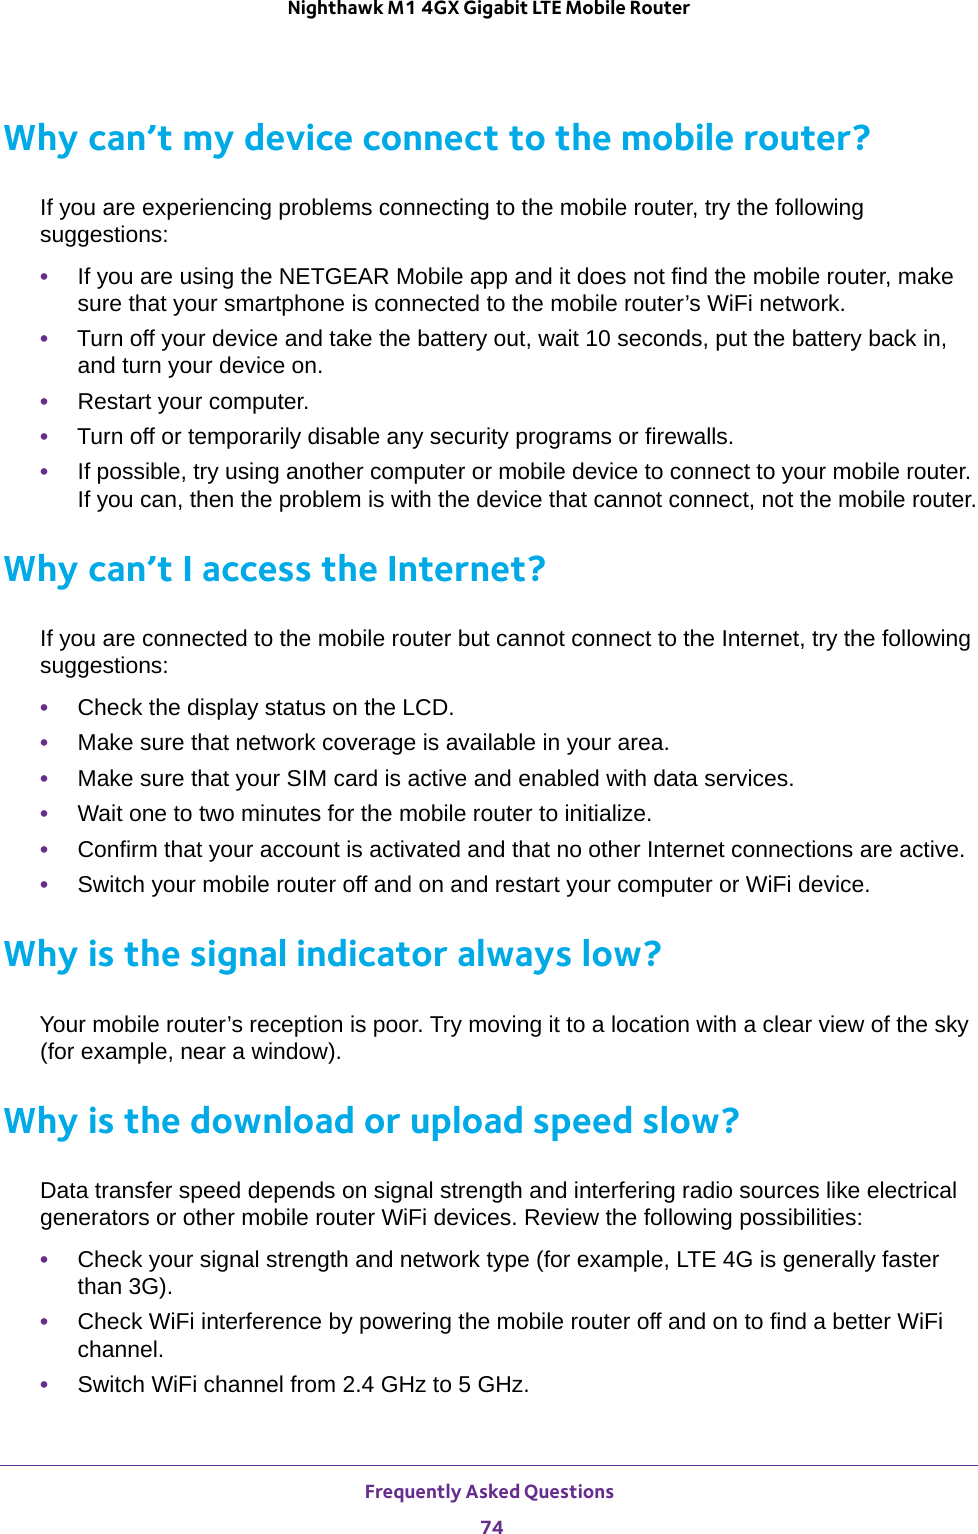 Frequently Asked Questions 74Nighthawk M1 4GX Gigabit LTE Mobile Router Why can’t my device connect to the mobile router?If you are experiencing problems connecting to the mobile router, try the following suggestions:•If you are using the NETGEAR Mobile app and it does not find the mobile router, make sure that your smartphone is connected to the mobile router’s WiFi network.•Turn off your device and take the battery out, wait 10 seconds, put the battery back in, and turn your device on.•Restart your computer.•Turn off or temporarily disable any security programs or firewalls.•If possible, try using another computer or mobile device to connect to your mobile router. If you can, then the problem is with the device that cannot connect, not the mobile router.Why can’t I access the Internet?If you are connected to the mobile router but cannot connect to the Internet, try the following suggestions:•Check the display status on the LCD.•Make sure that network coverage is available in your area.•Make sure that your SIM card is active and enabled with data services.•Wait one to two minutes for the mobile router to initialize.•Confirm that your account is activated and that no other Internet connections are active.•Switch your mobile router off and on and restart your computer or WiFi device.Why is the signal indicator always low?Your mobile router’s reception is poor. Try moving it to a location with a clear view of the sky (for example, near a window).Why is the download or upload speed slow?Data transfer speed depends on signal strength and interfering radio sources like electrical generators or other mobile router WiFi devices. Review the following possibilities:•Check your signal strength and network type (for example, LTE 4G is generally faster than 3G).•Check WiFi interference by powering the mobile router off and on to find a better WiFi channel.•Switch WiFi channel from 2.4 GHz to 5 GHz.